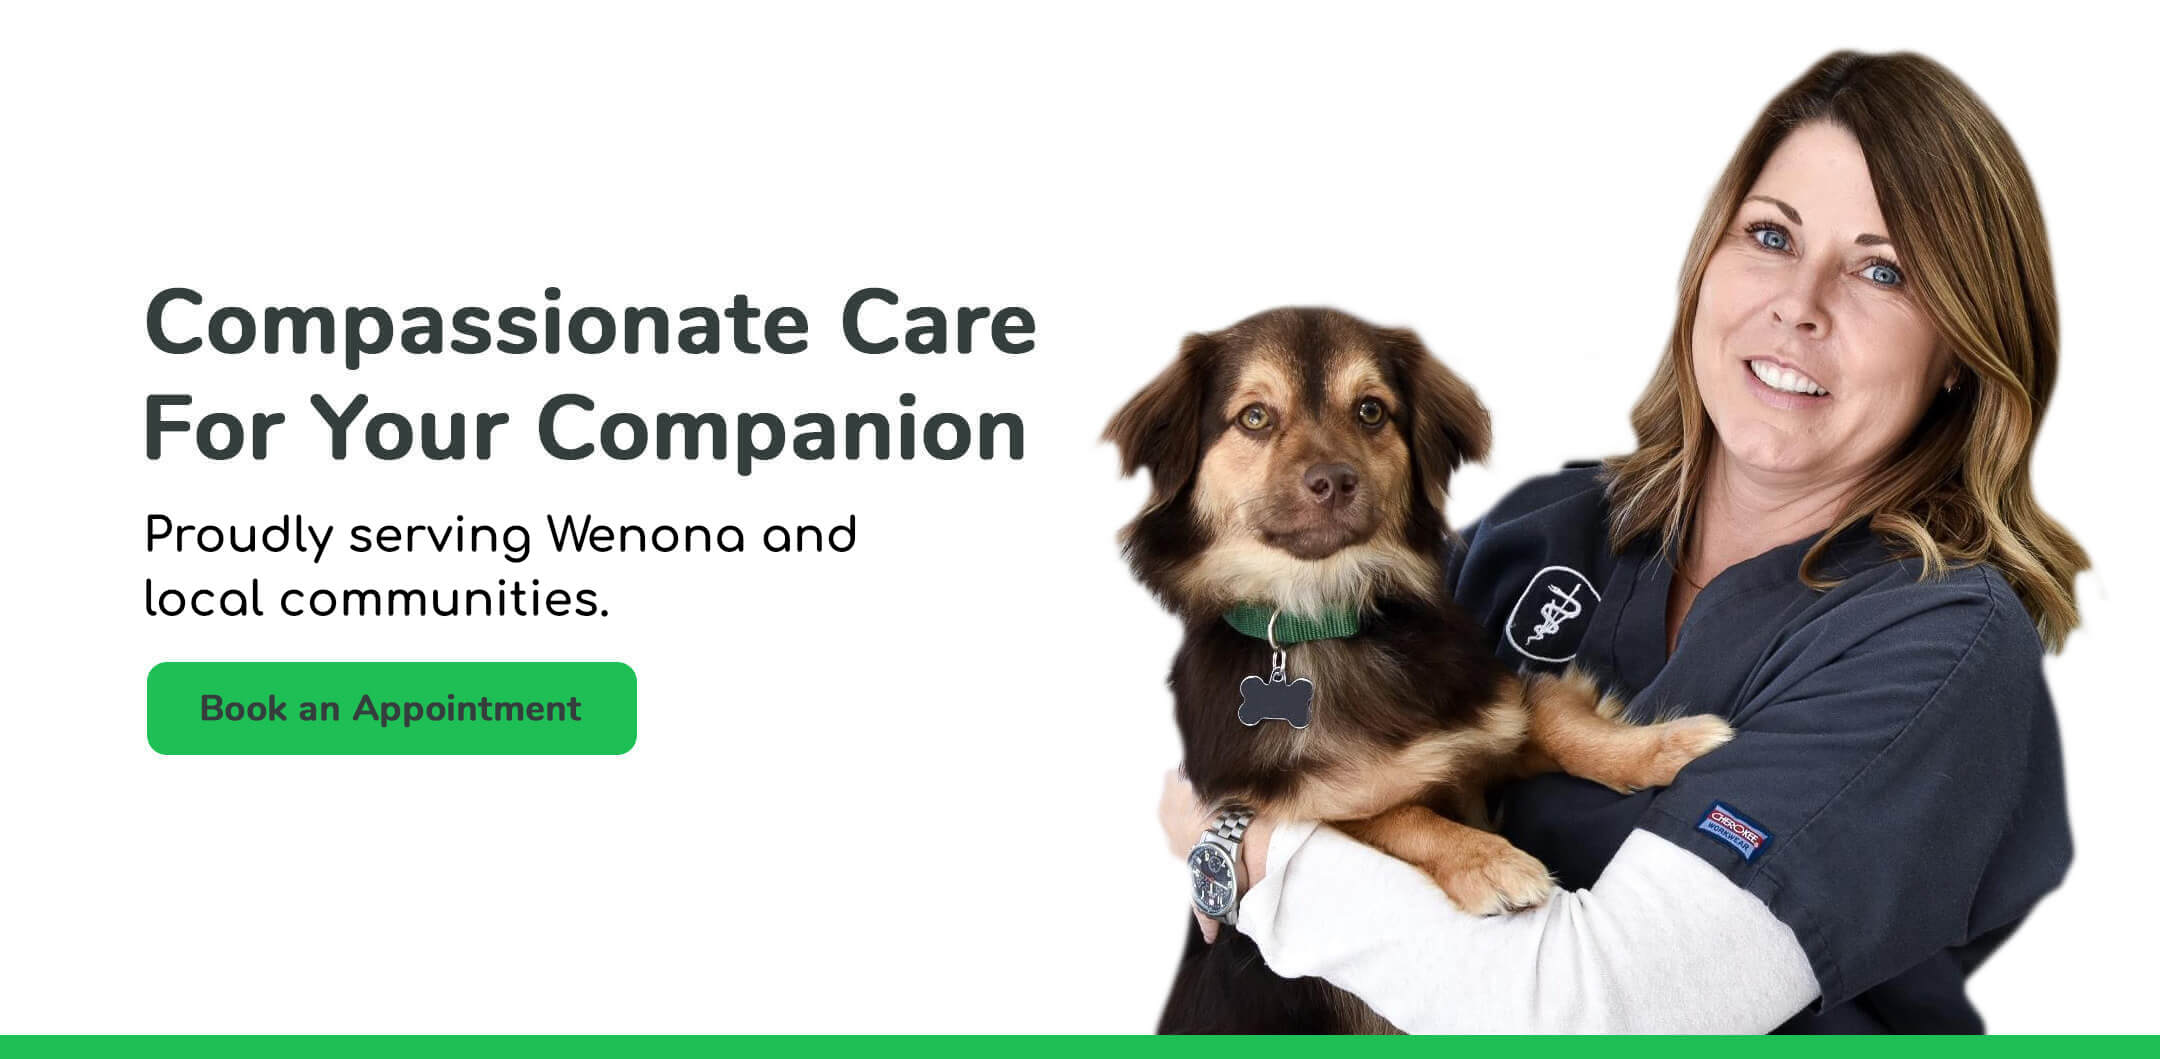 Compassionate care for your companion. Proudly serving Wenona and local communities. Book an appointment.